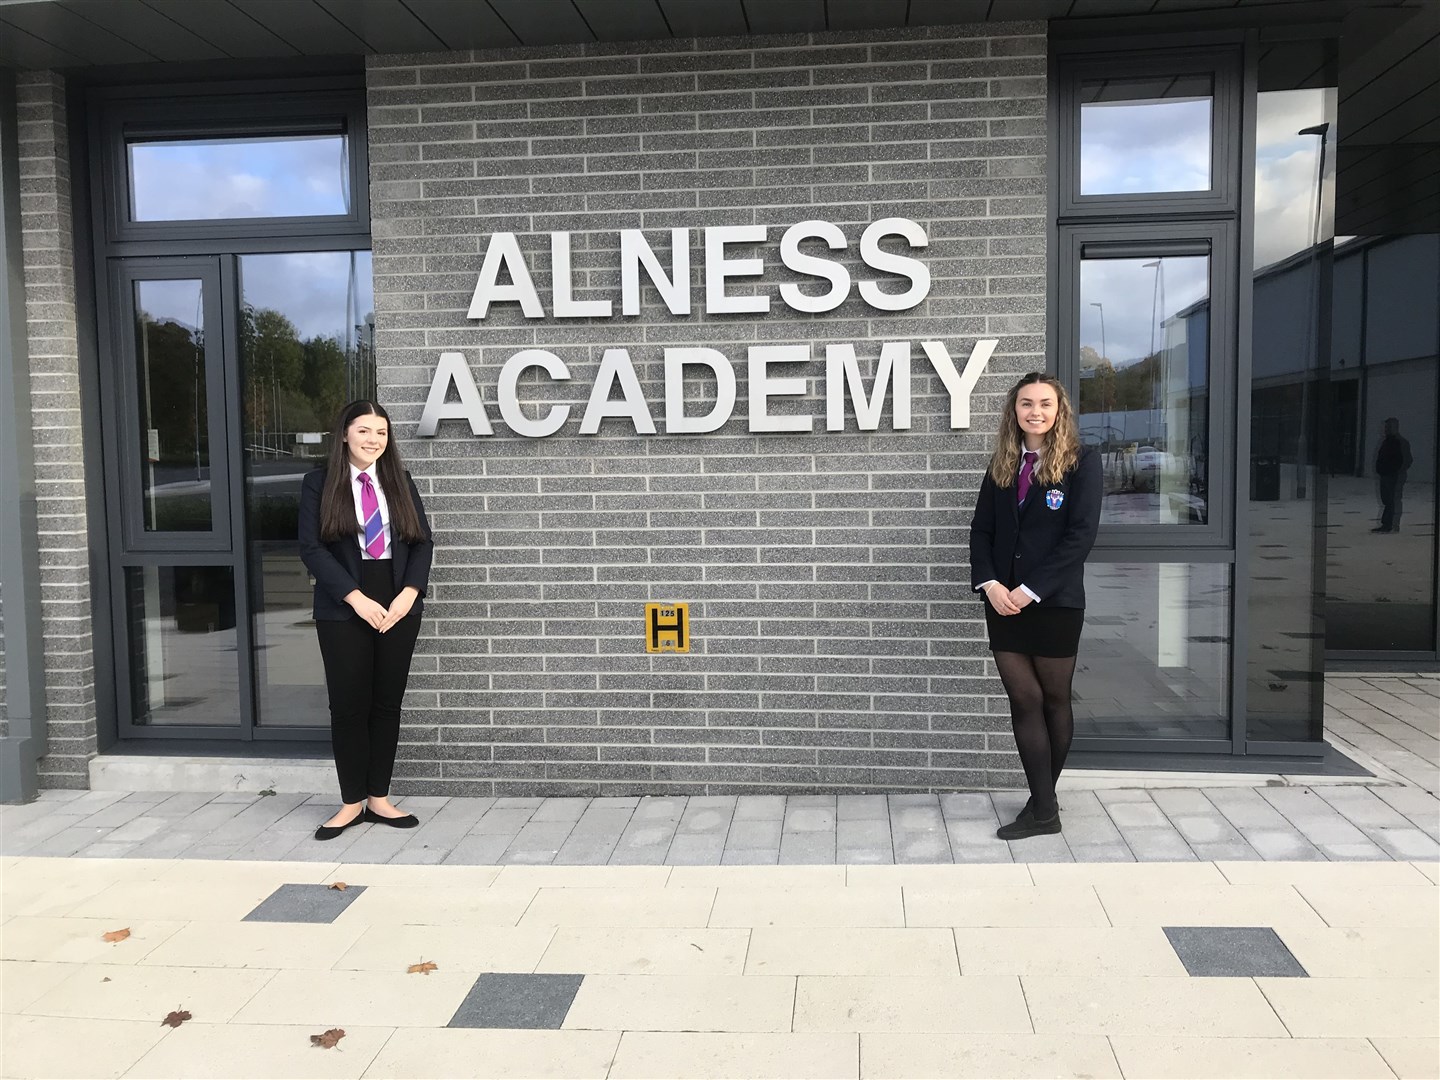 Alness Academy house captains (left to right) Marisska Slupek and Maria MacKay outside the new state of the art school building